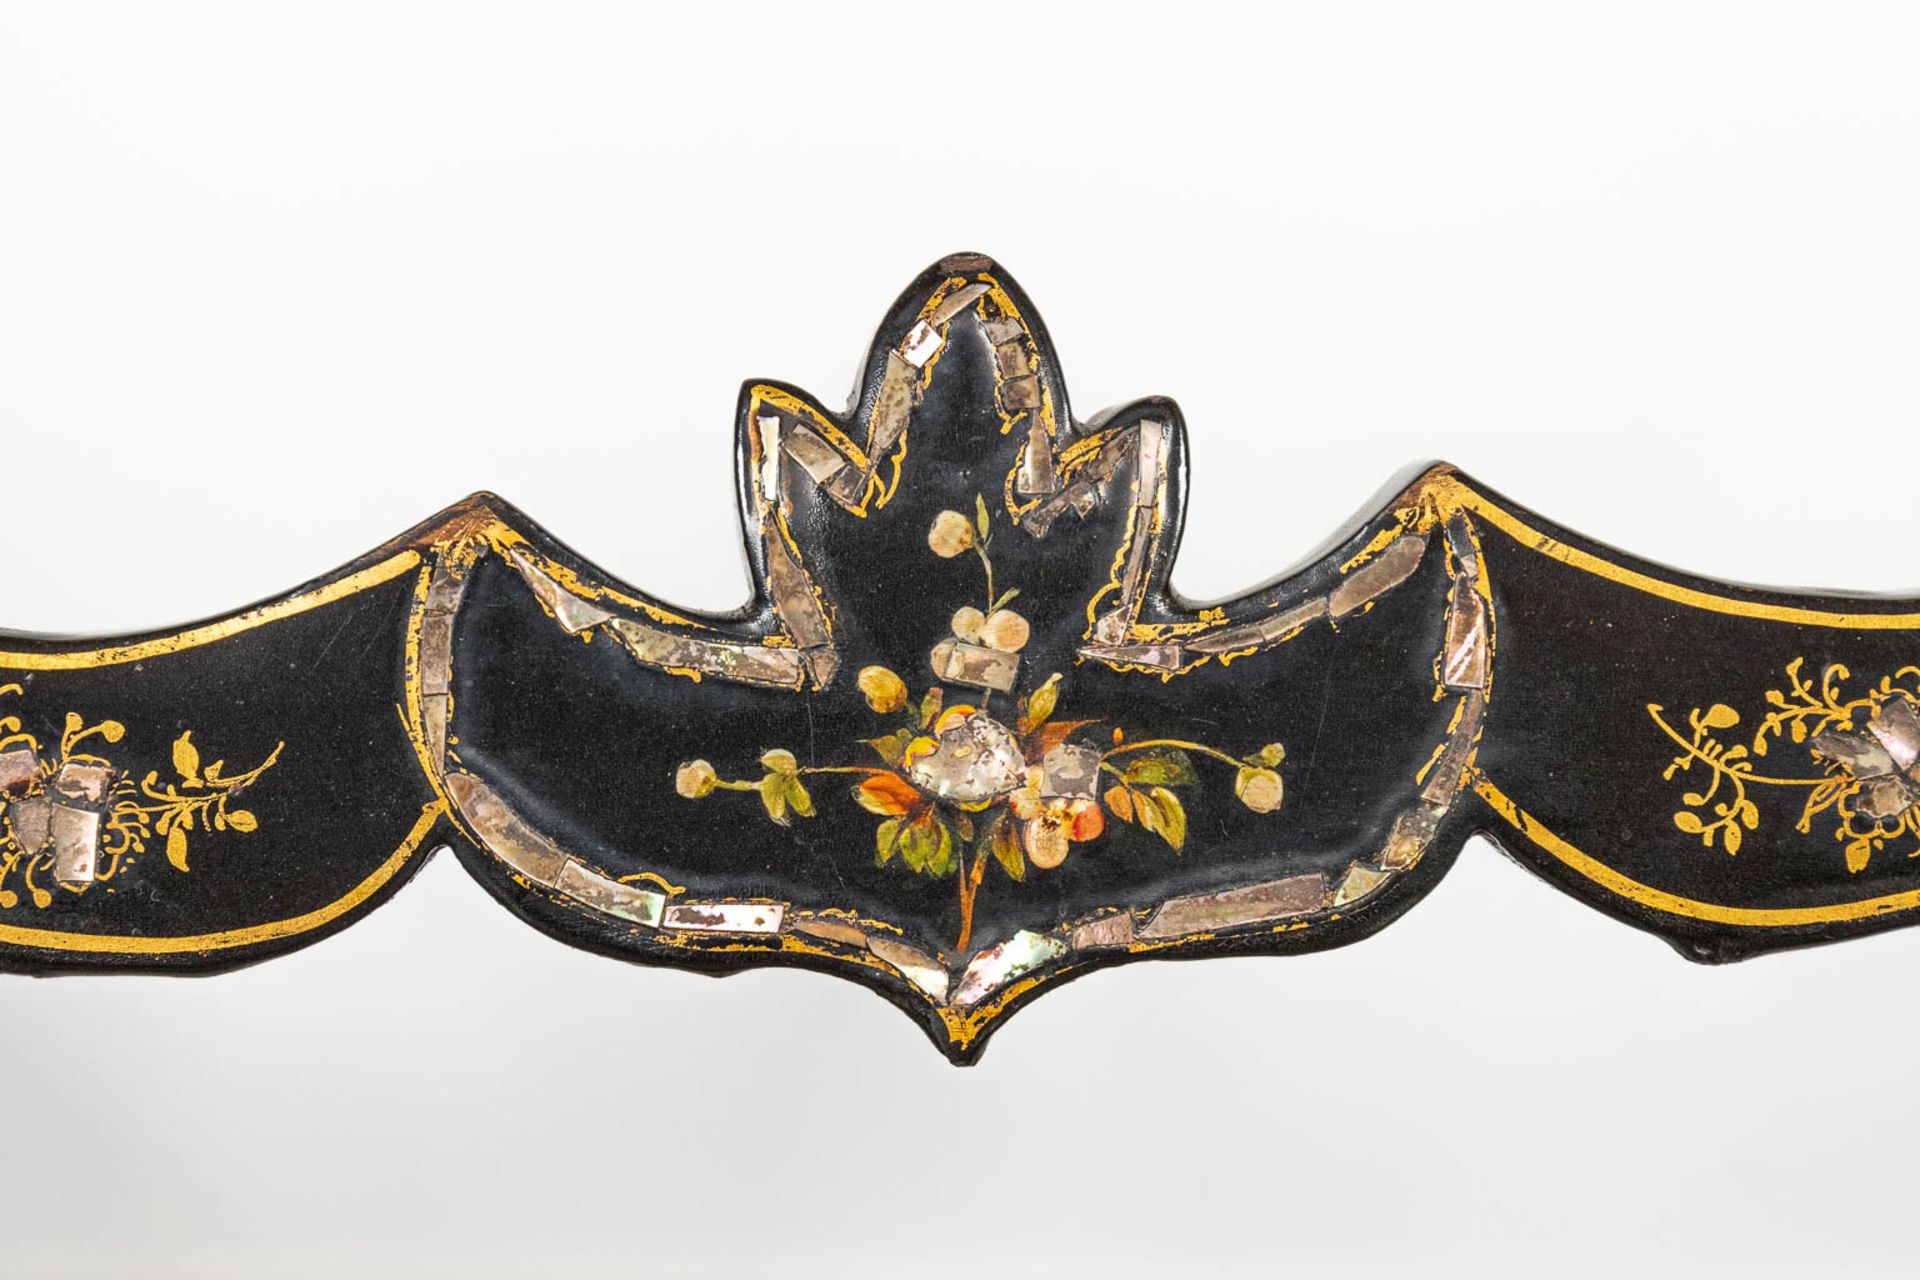 A collection of 3 chairs inlaid with mother of pearl and hand-painted decors. - Image 8 of 10